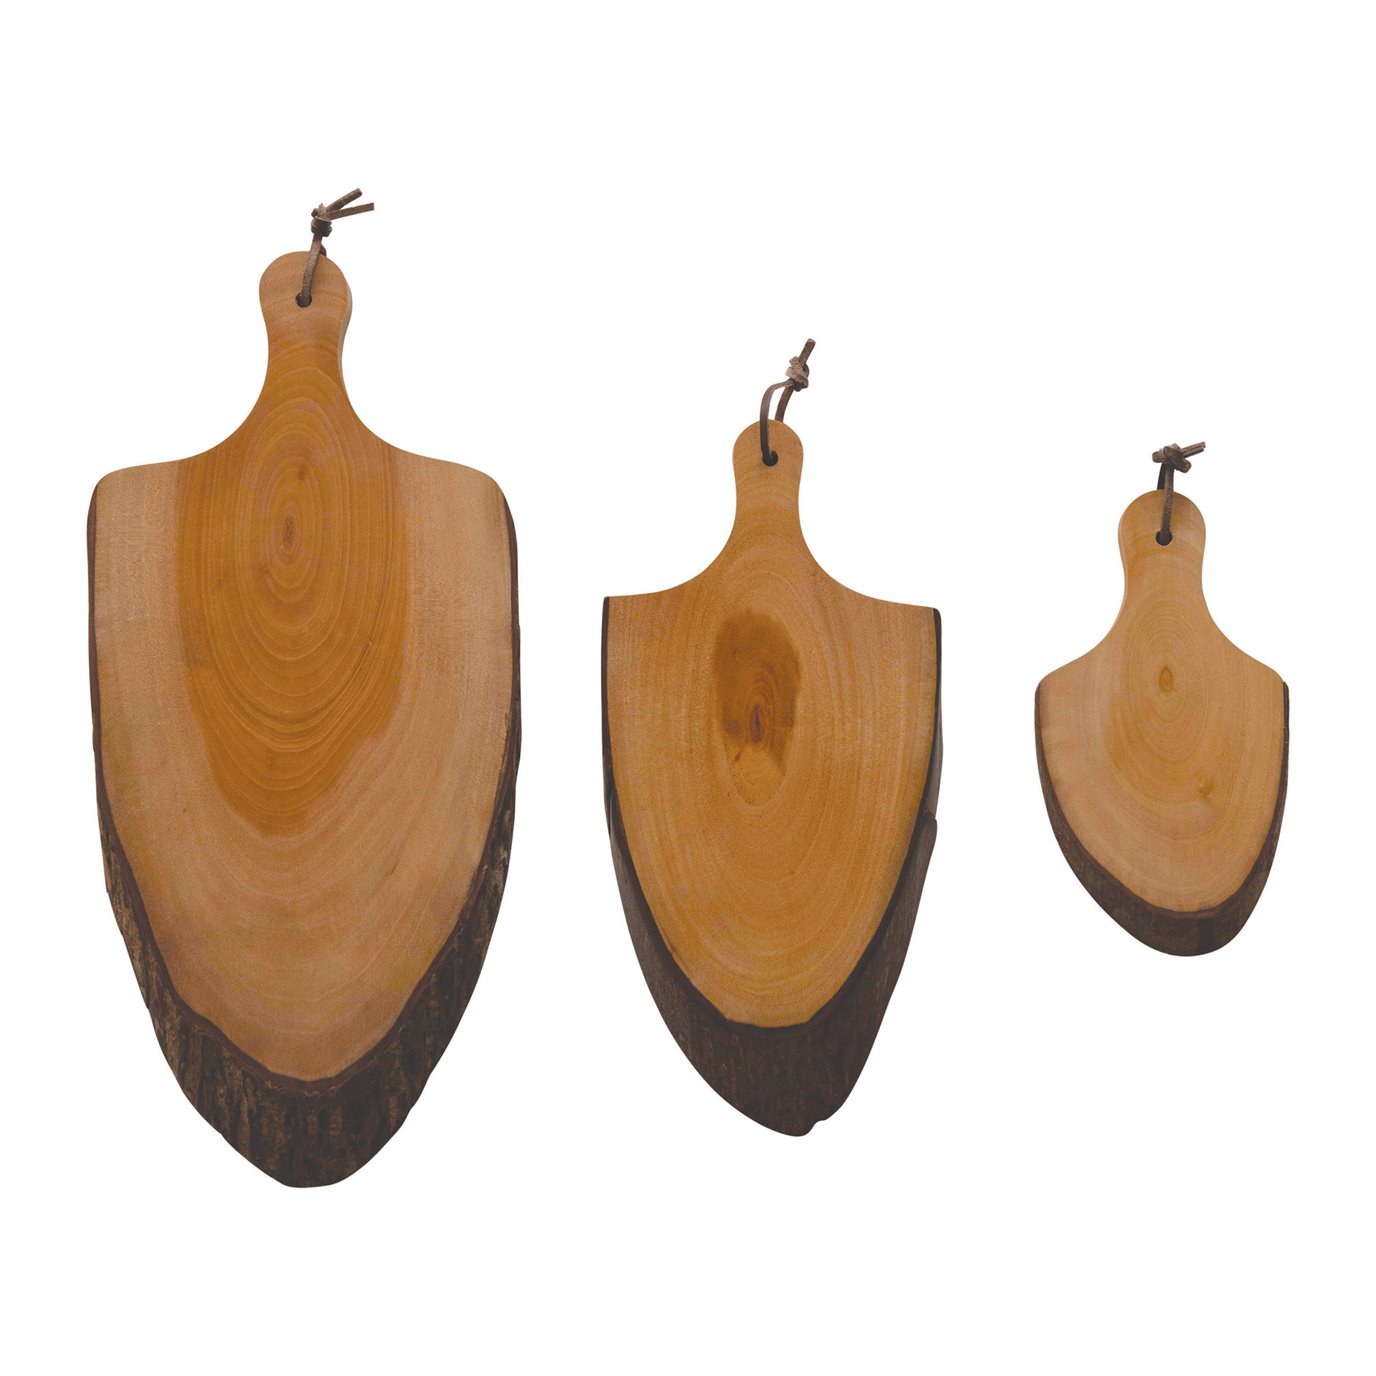 Mahogany Wood Cheese/Cutting Boards with Raw Edge & Handles, Set of 3 (Each One Will Vary)